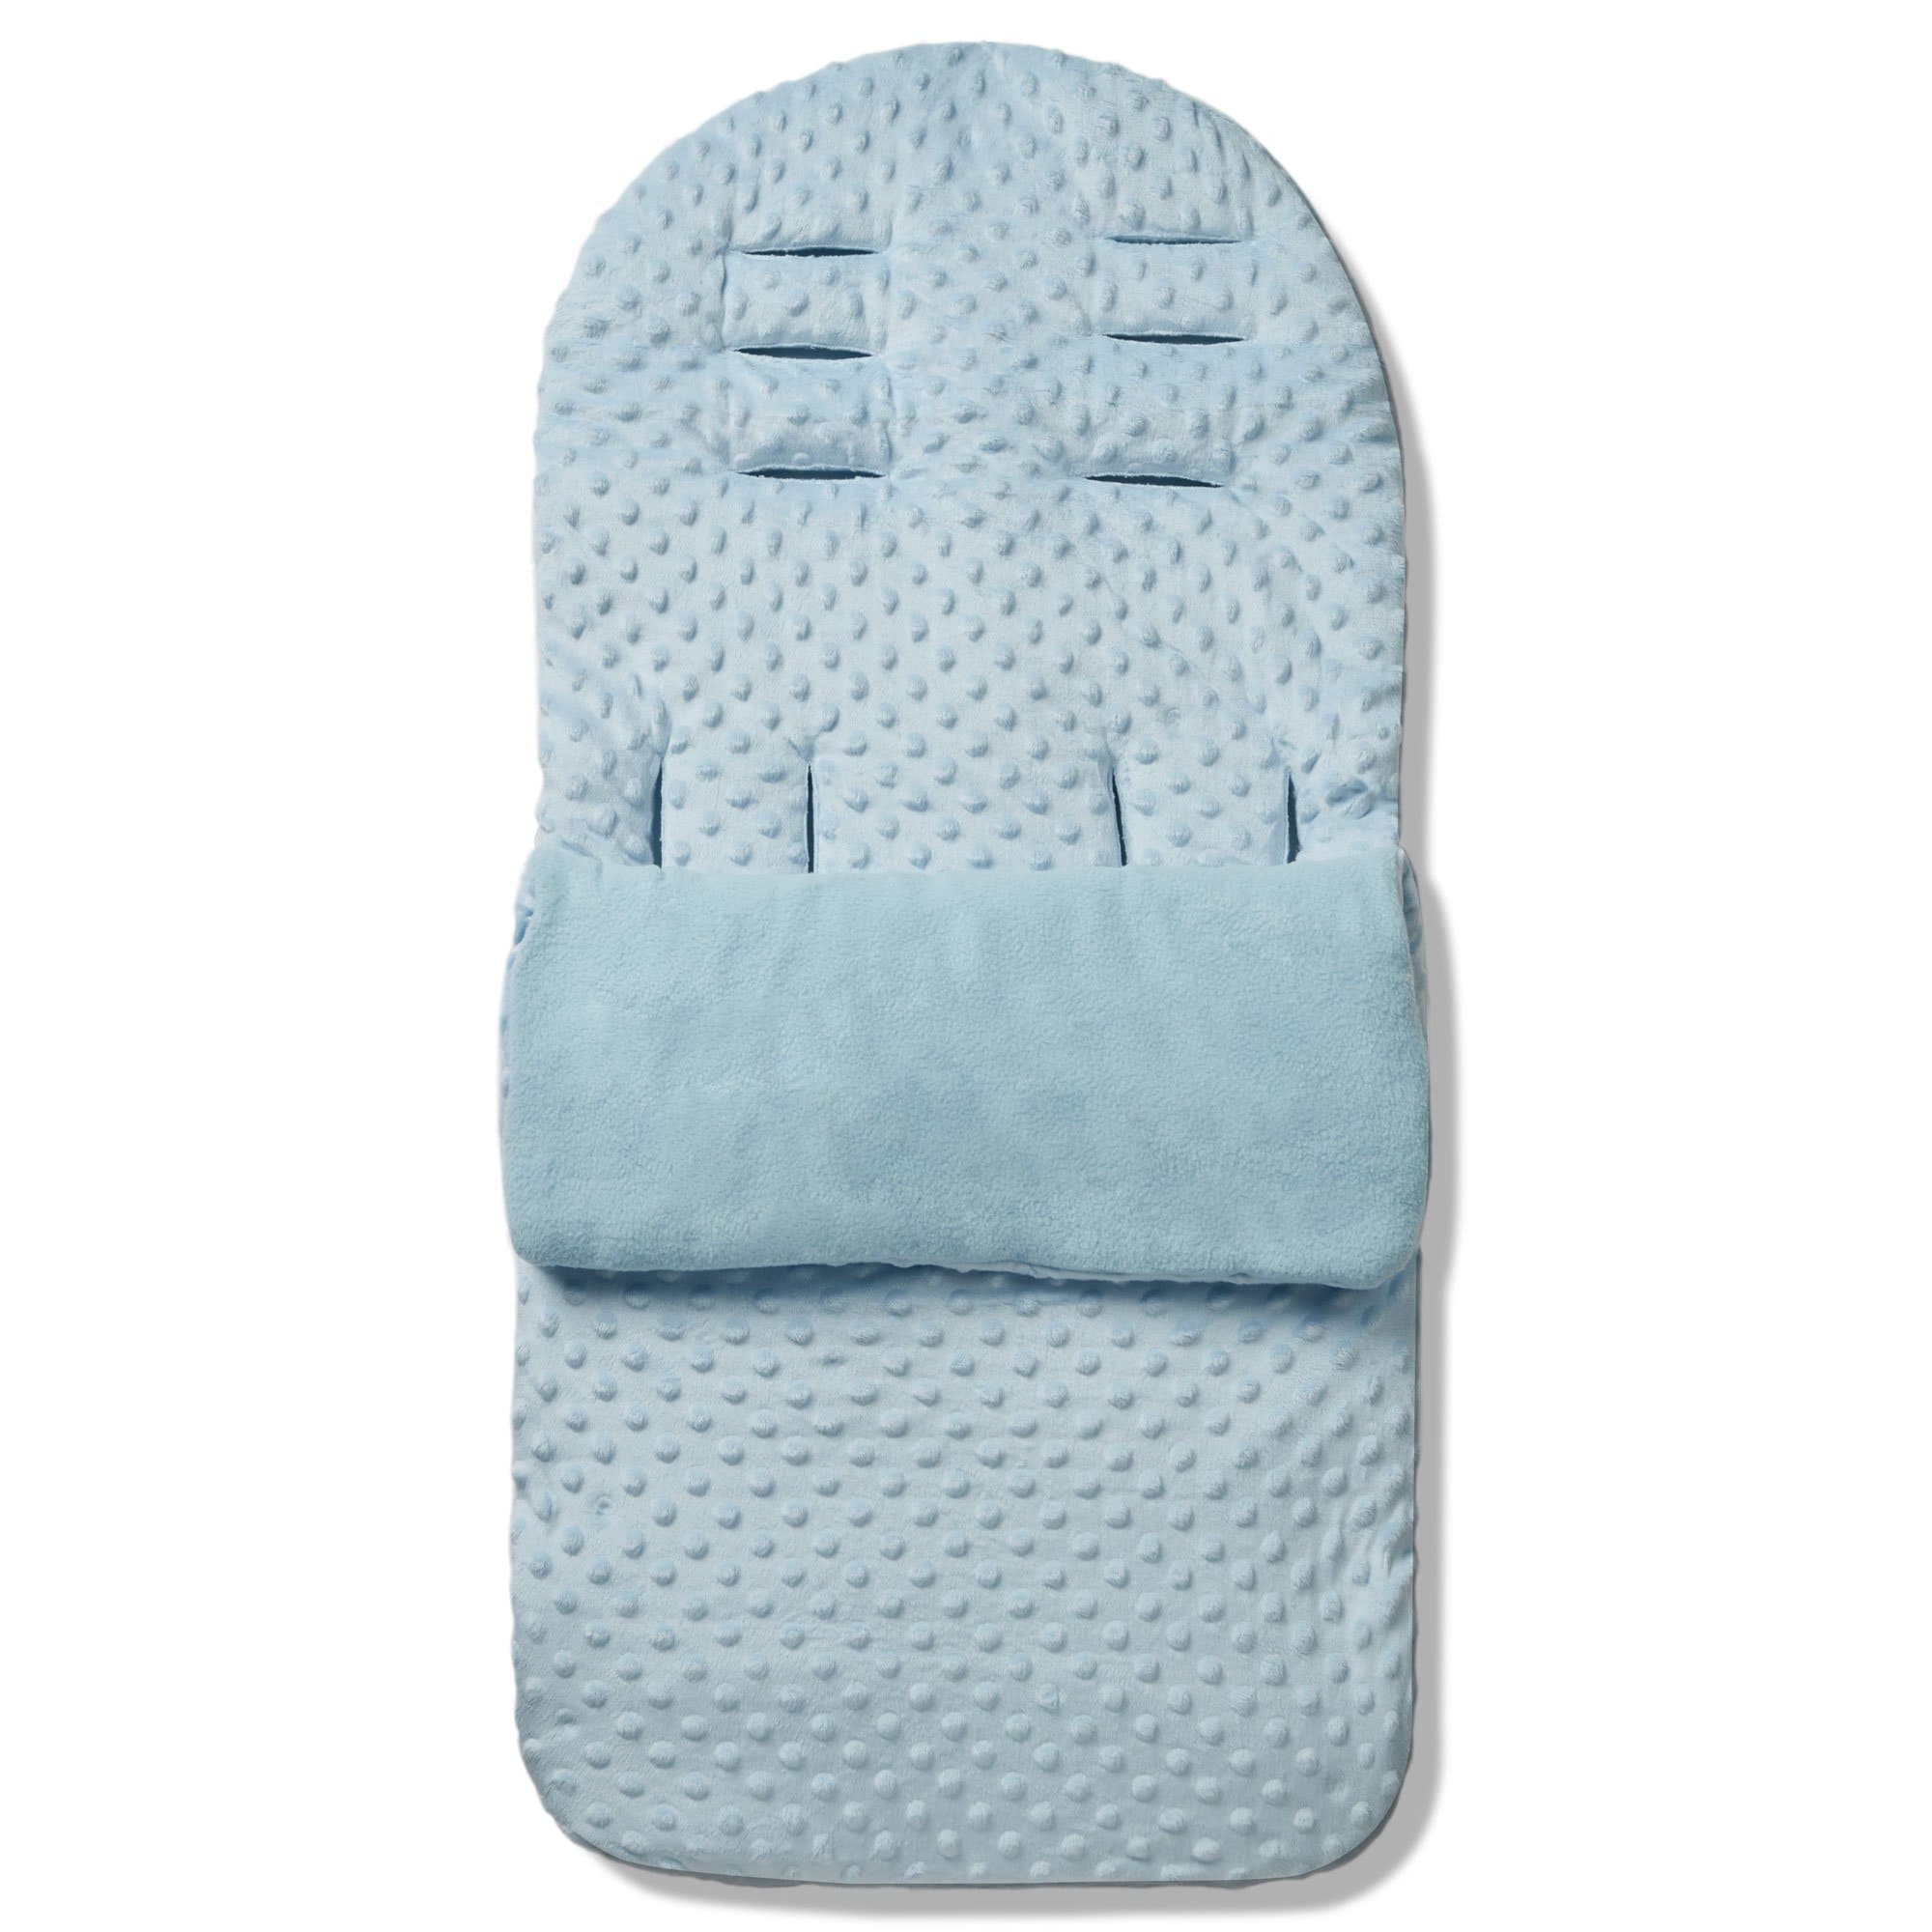 Dimple Footmuff / Cosy Toes Compatible with Bebecar - Blue / Fits All Models | For Your Little One